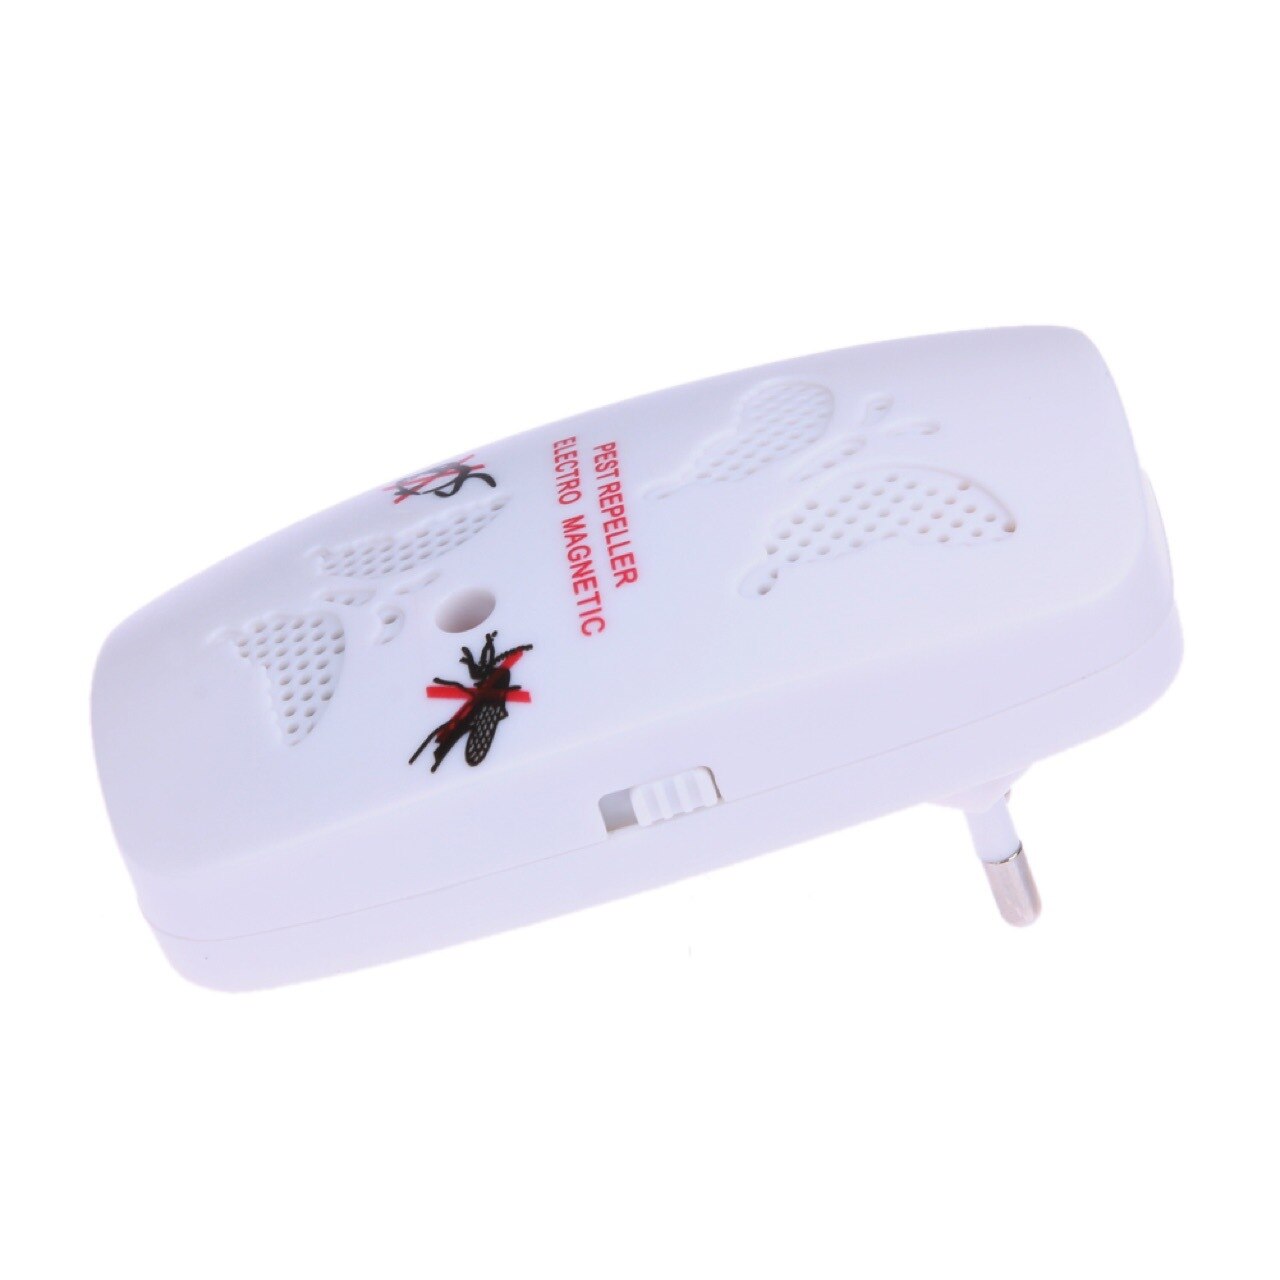 New Home Electronic Ultrasonic Pest Repeller Anti Mosquito Ants Spiders Roaches Repelling Electro Repeller Magnetic - ebowsos